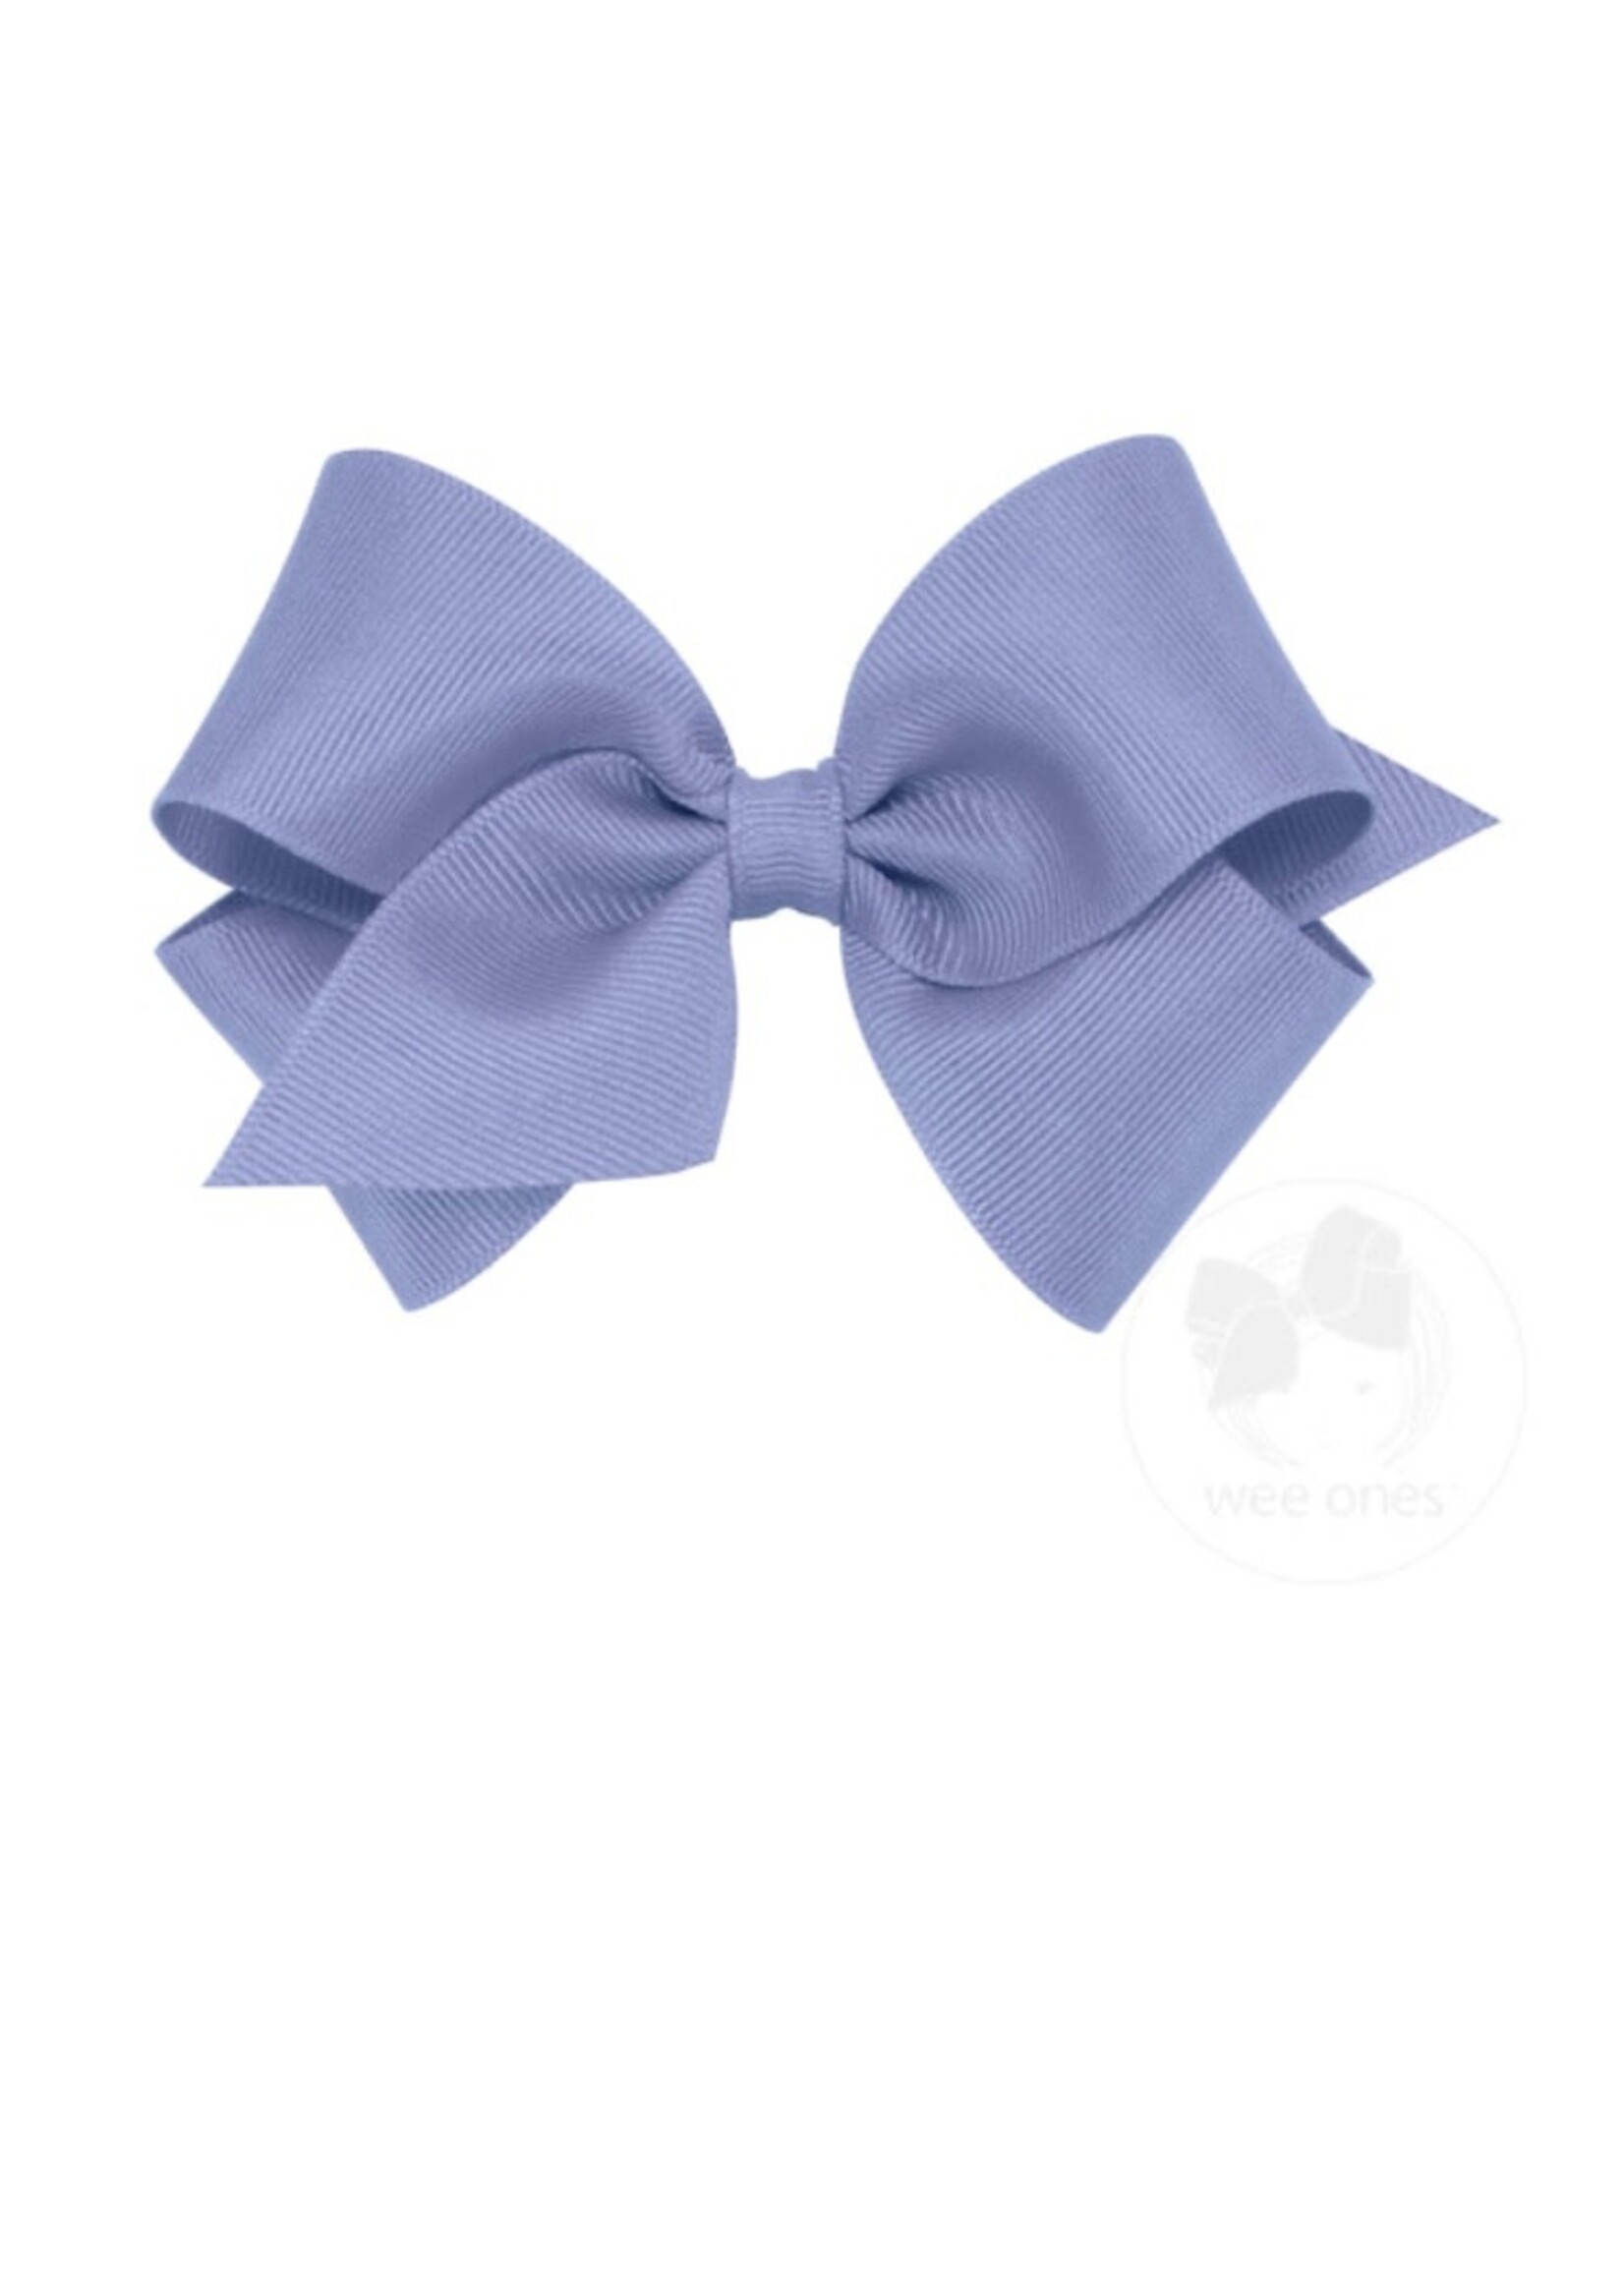 Wee Ones Wee Ones, Small Classic Hair Bow ||